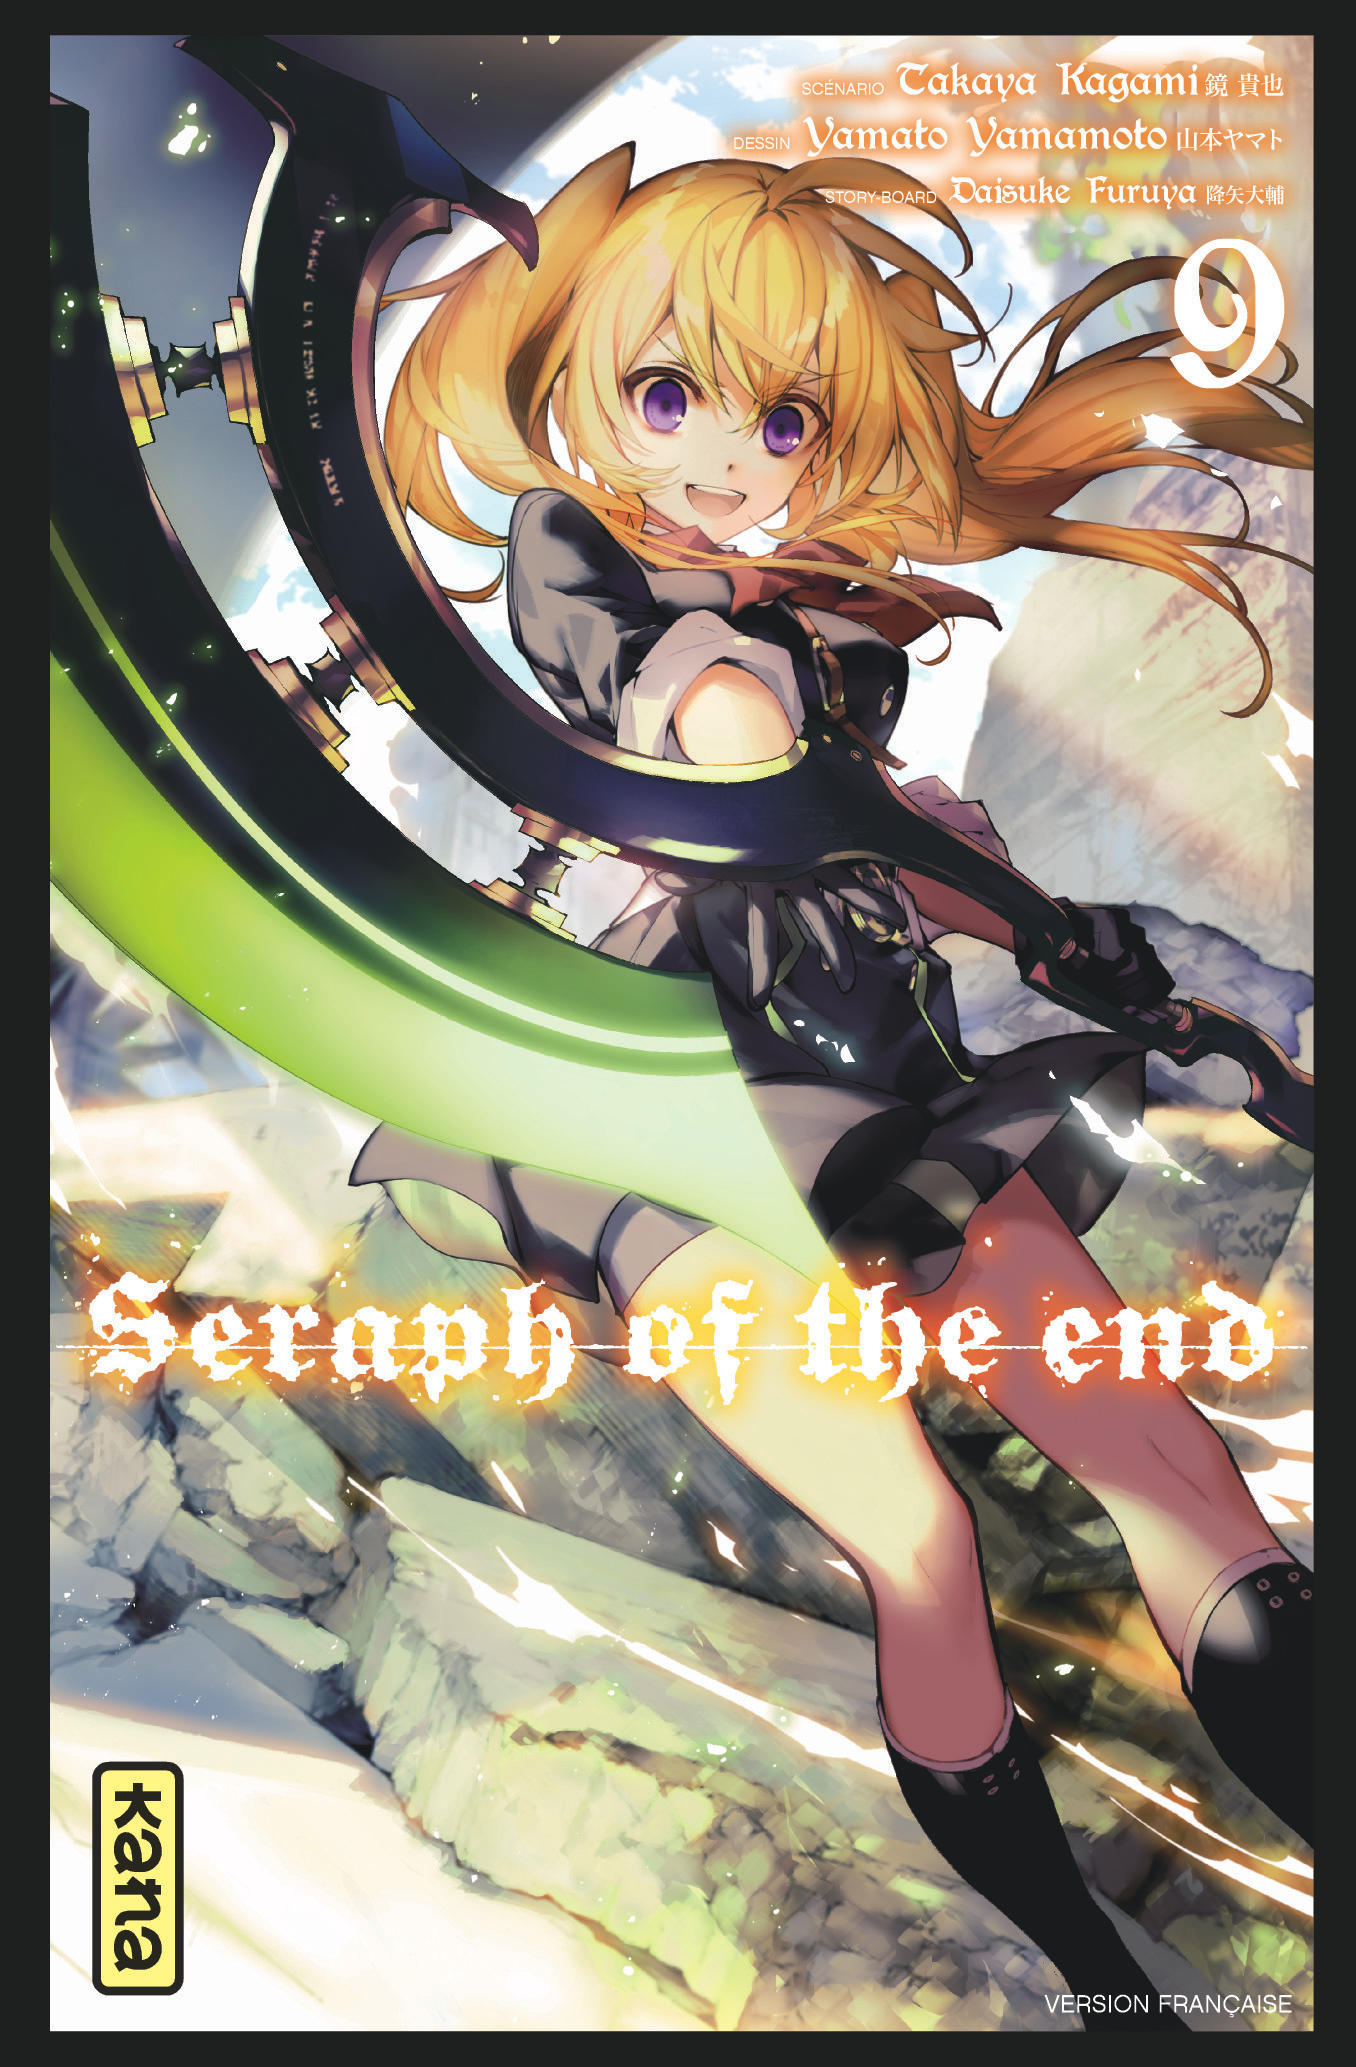 Seraph of the end – Tome 9 - couv